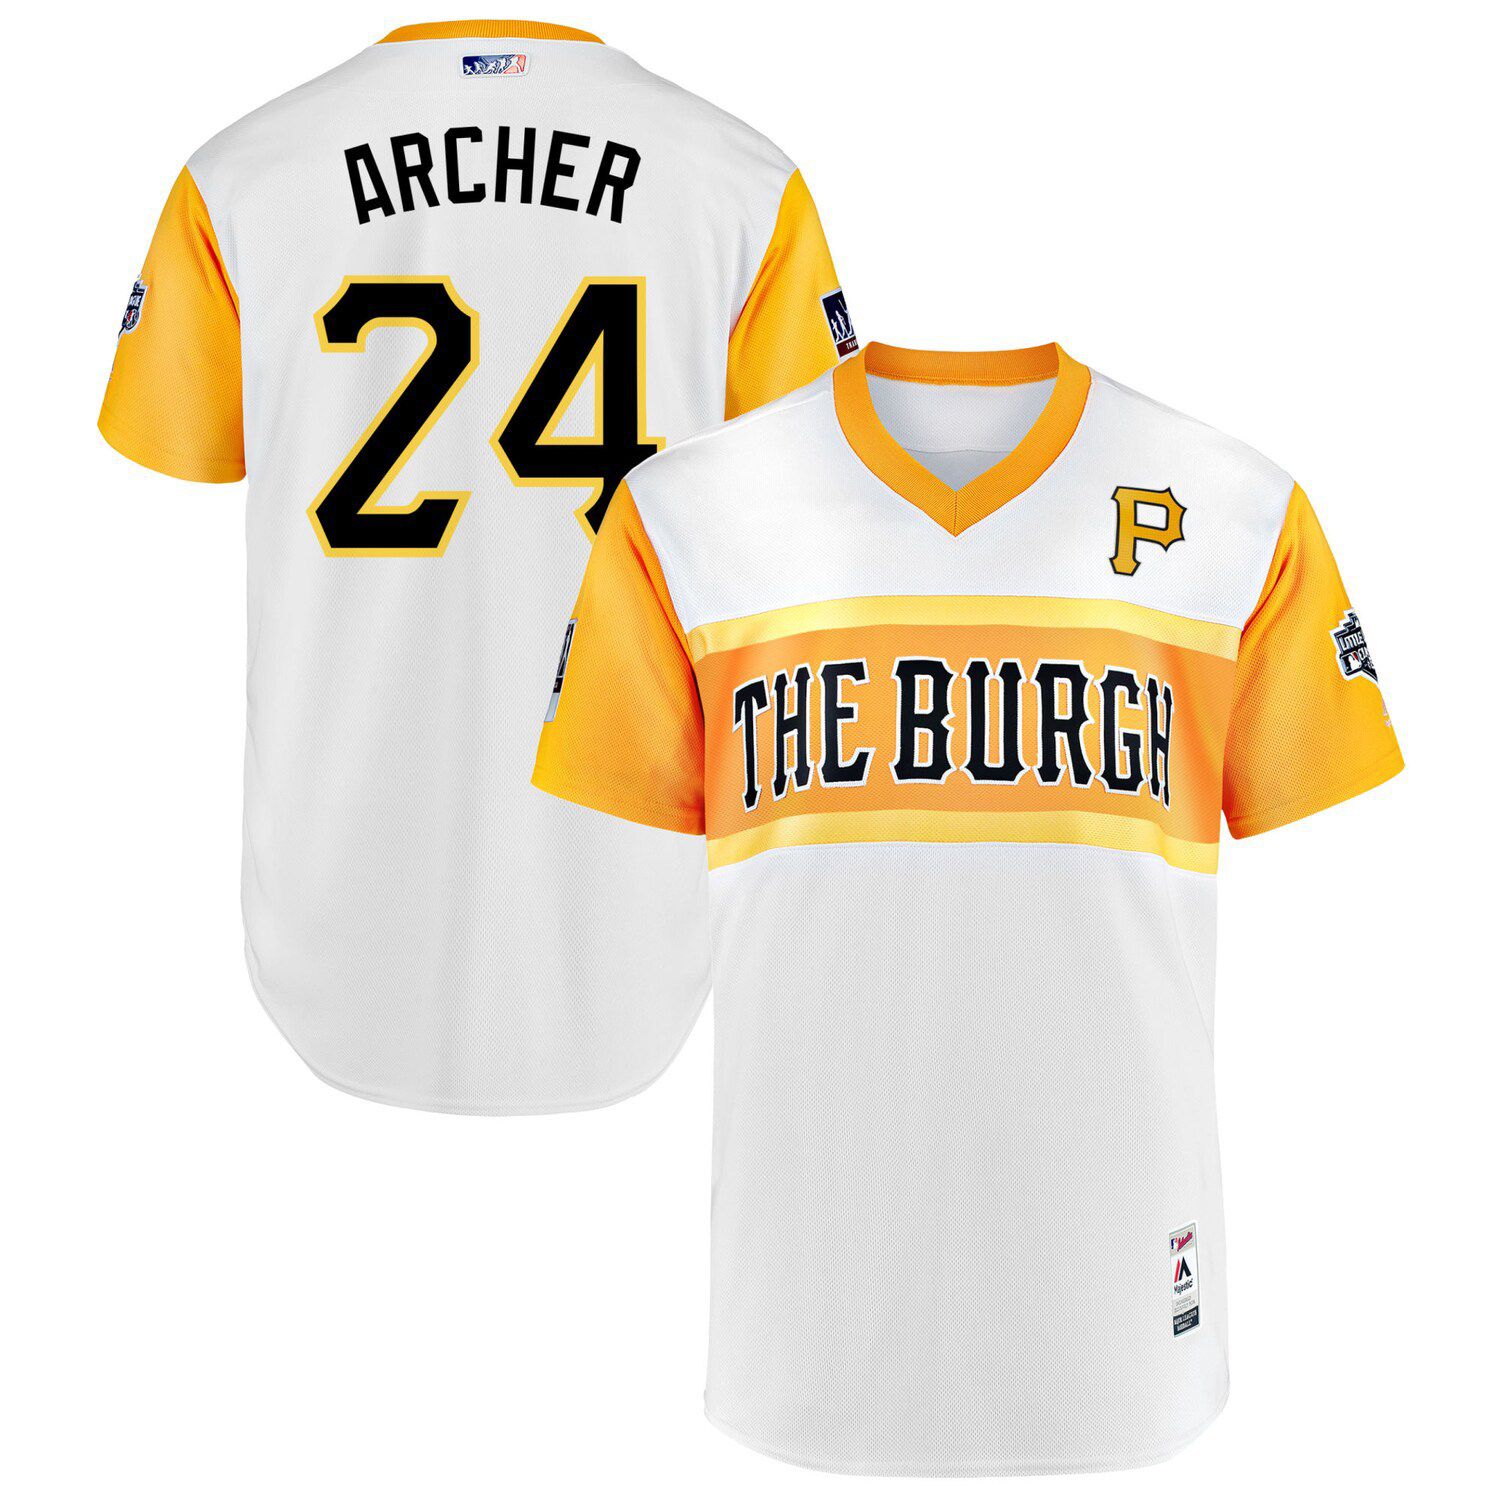 cheap authentic pittsburgh pirates jerseys